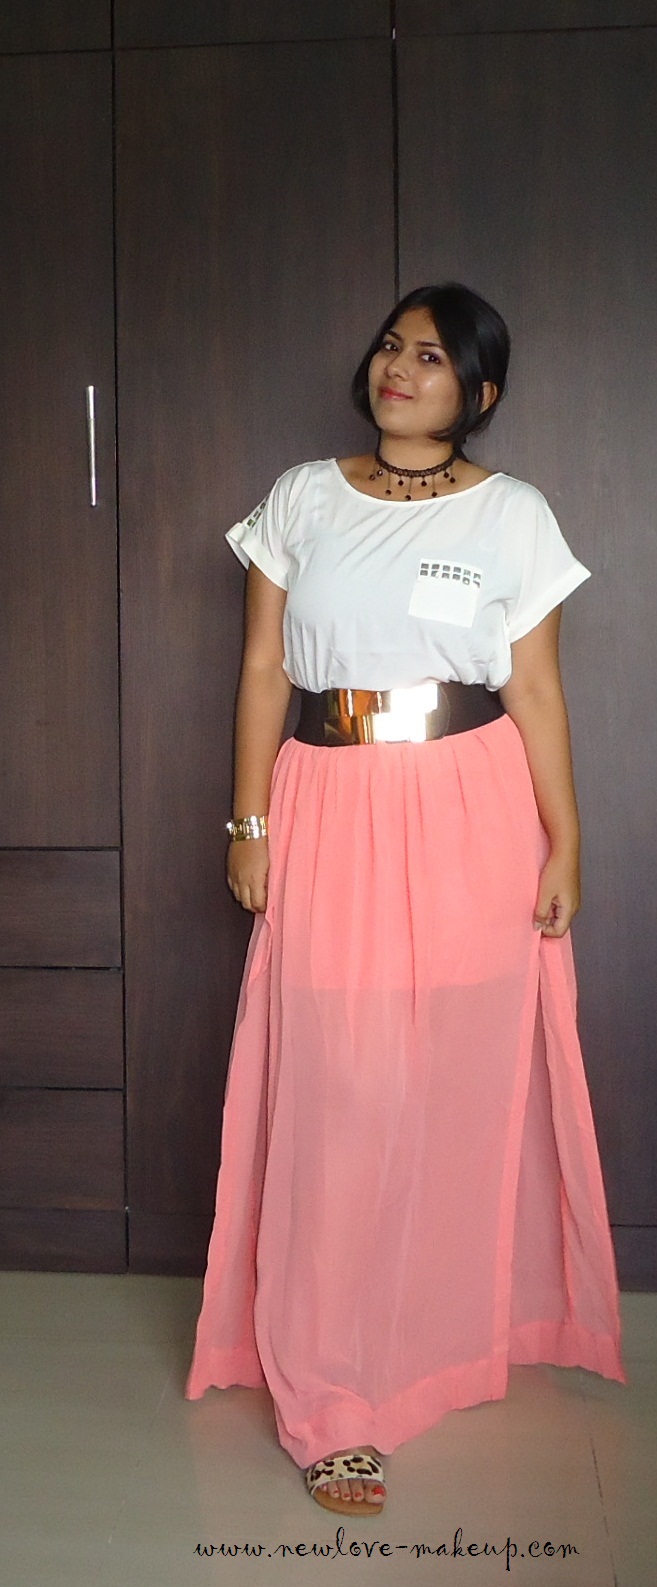 OOTD: Studded White Top, Coral Slit Maxi Skirt - New Love - Makeup